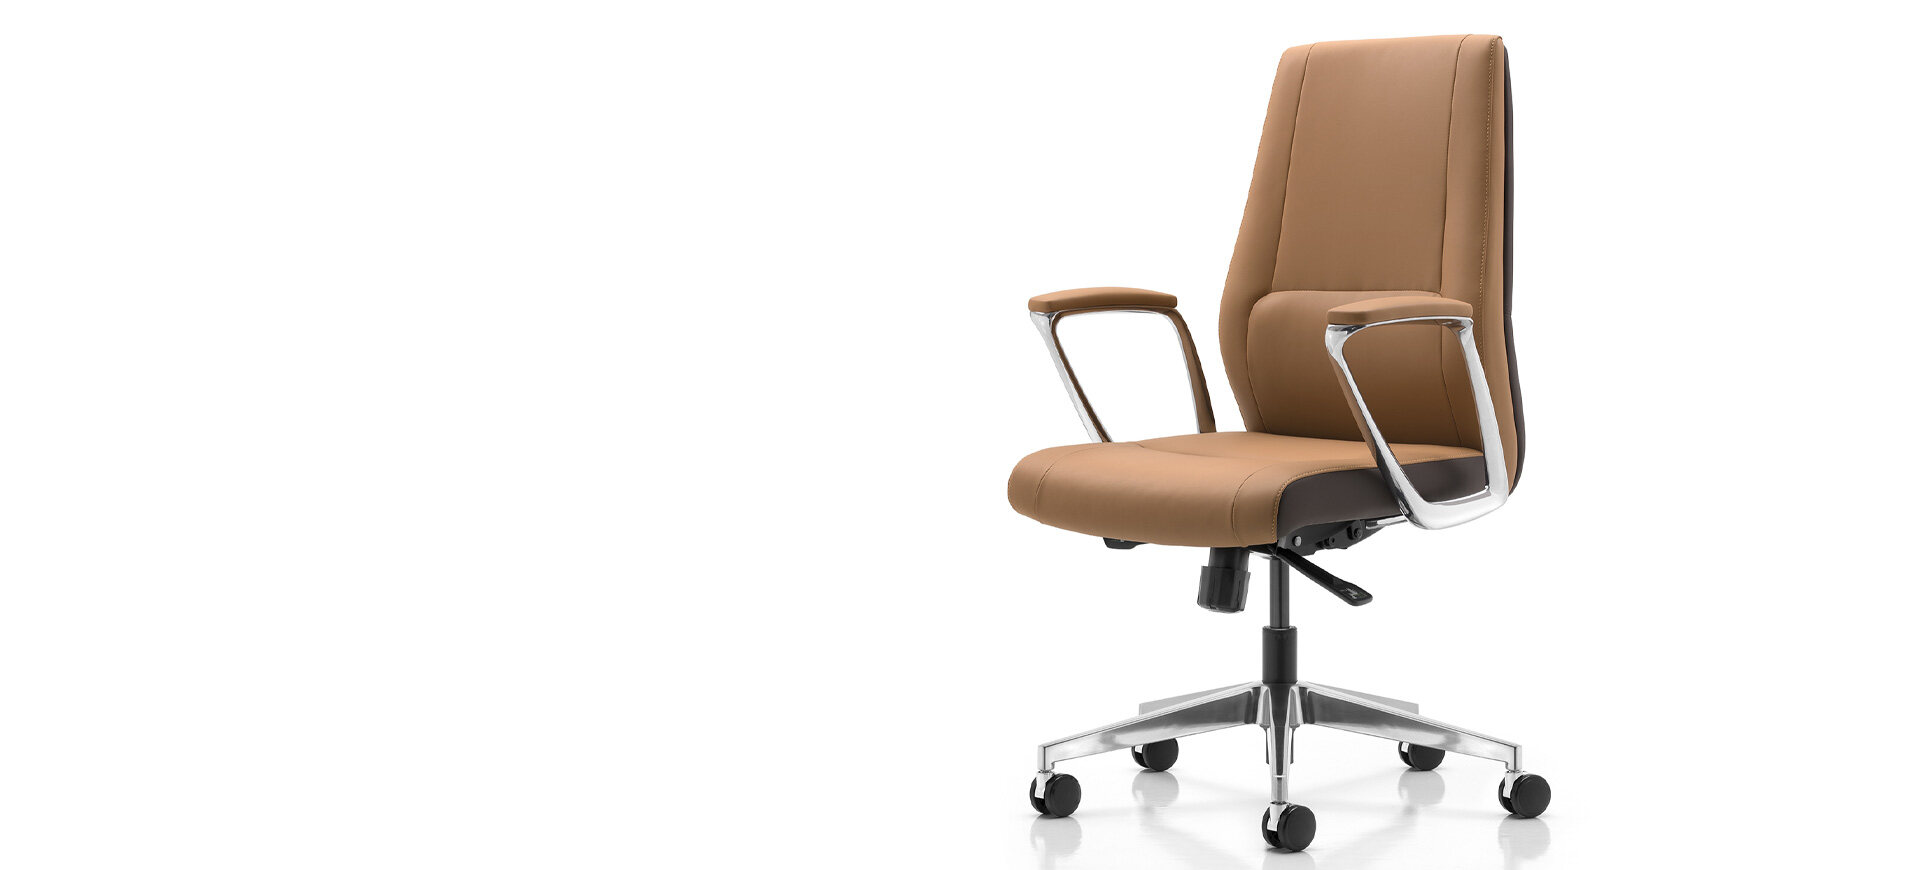 office accent chair,comfortable home office chair,industrial office chair